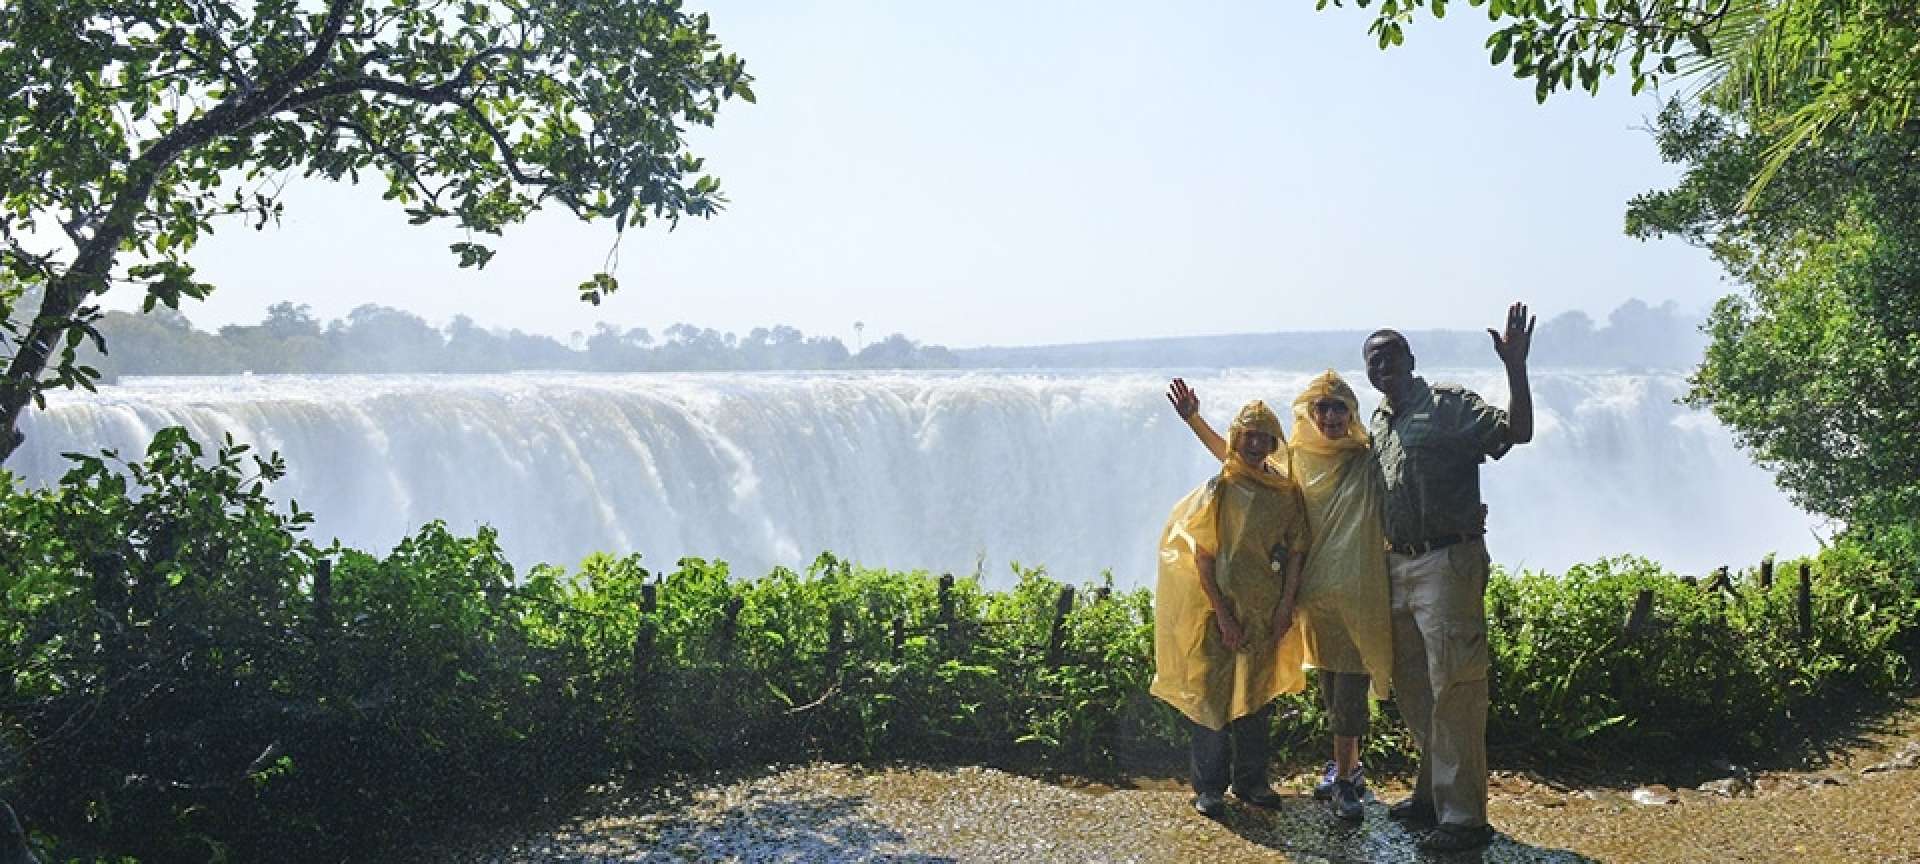 Young and old will appreciate the splendour of Victoria Falls